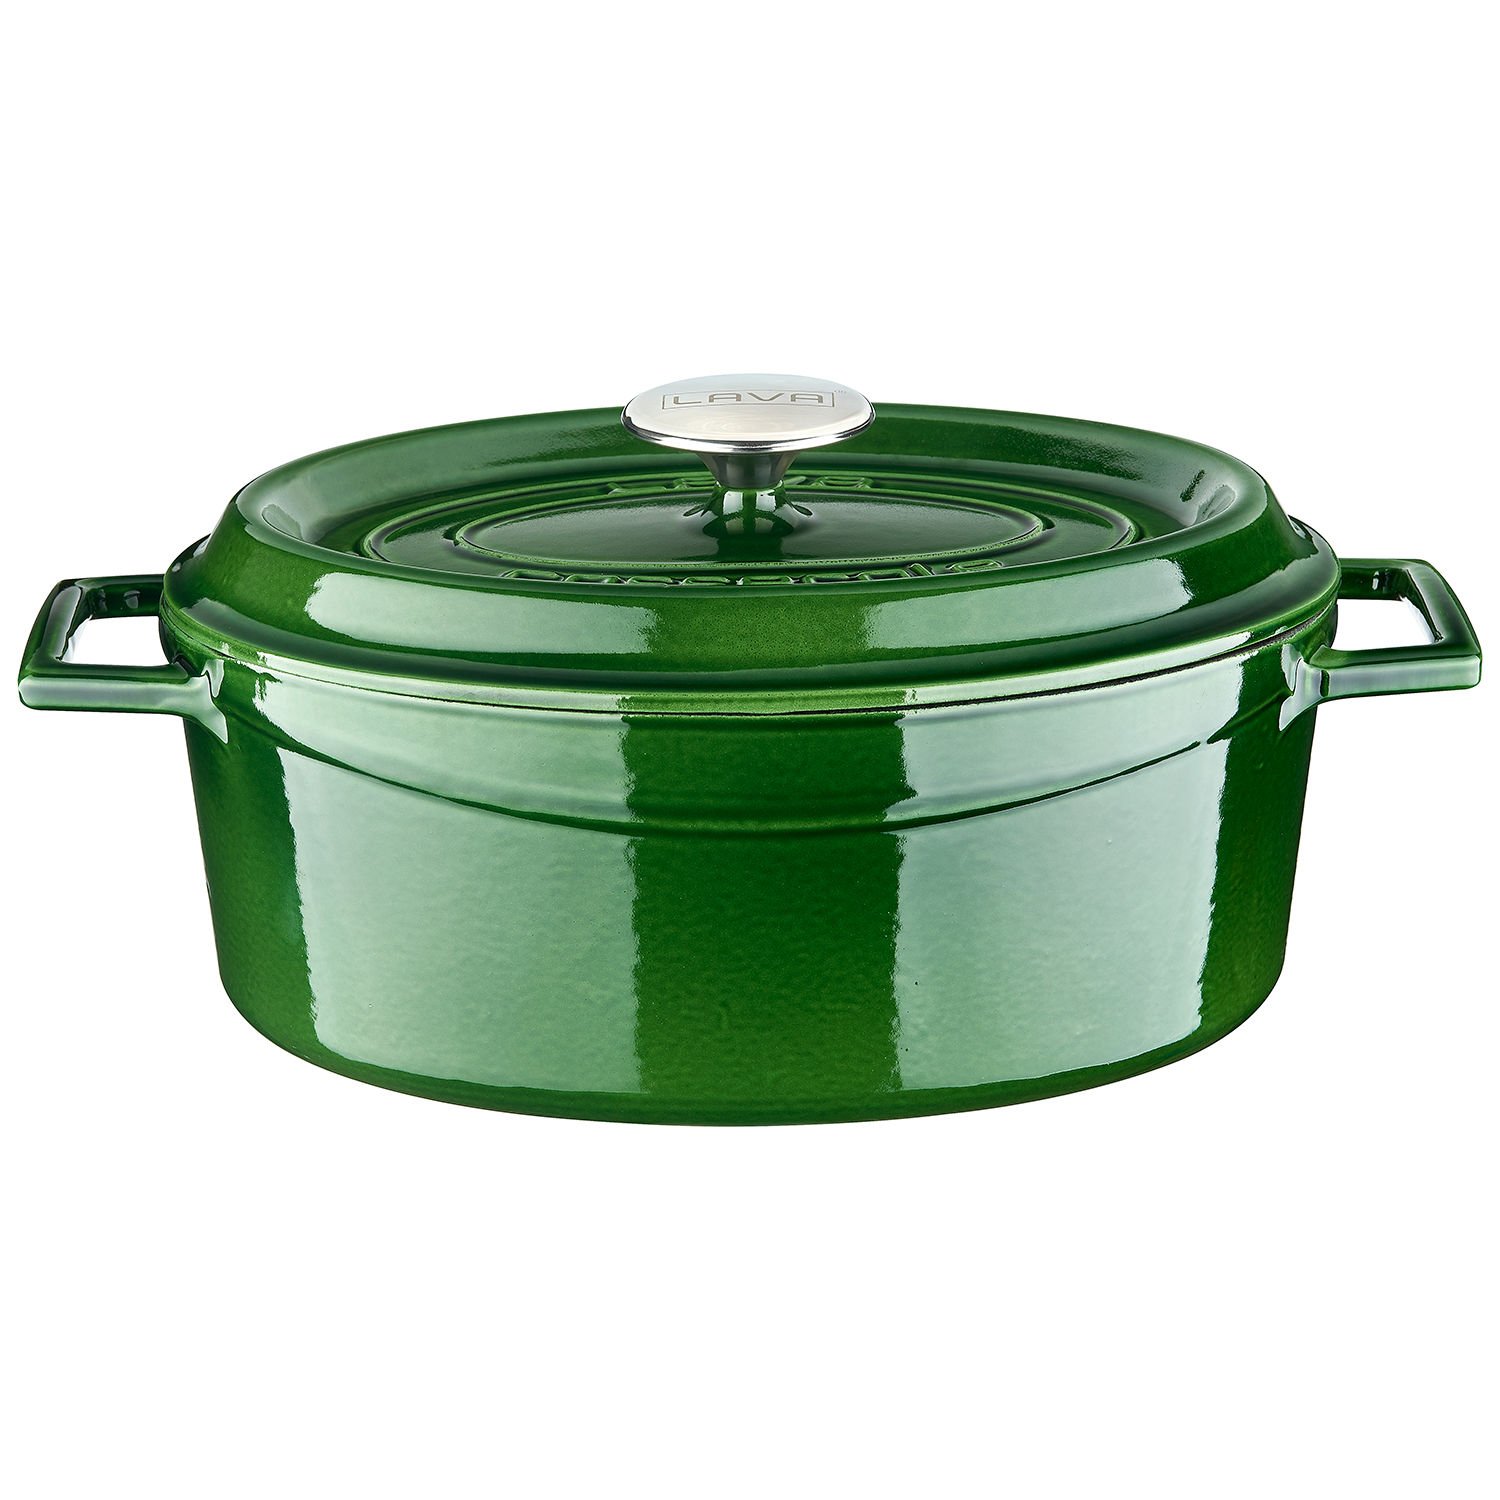 Lava Casting 23x29cm. Oval Cookware Cast Iron Monolithic Handled Premium Series Size- Majolica Green